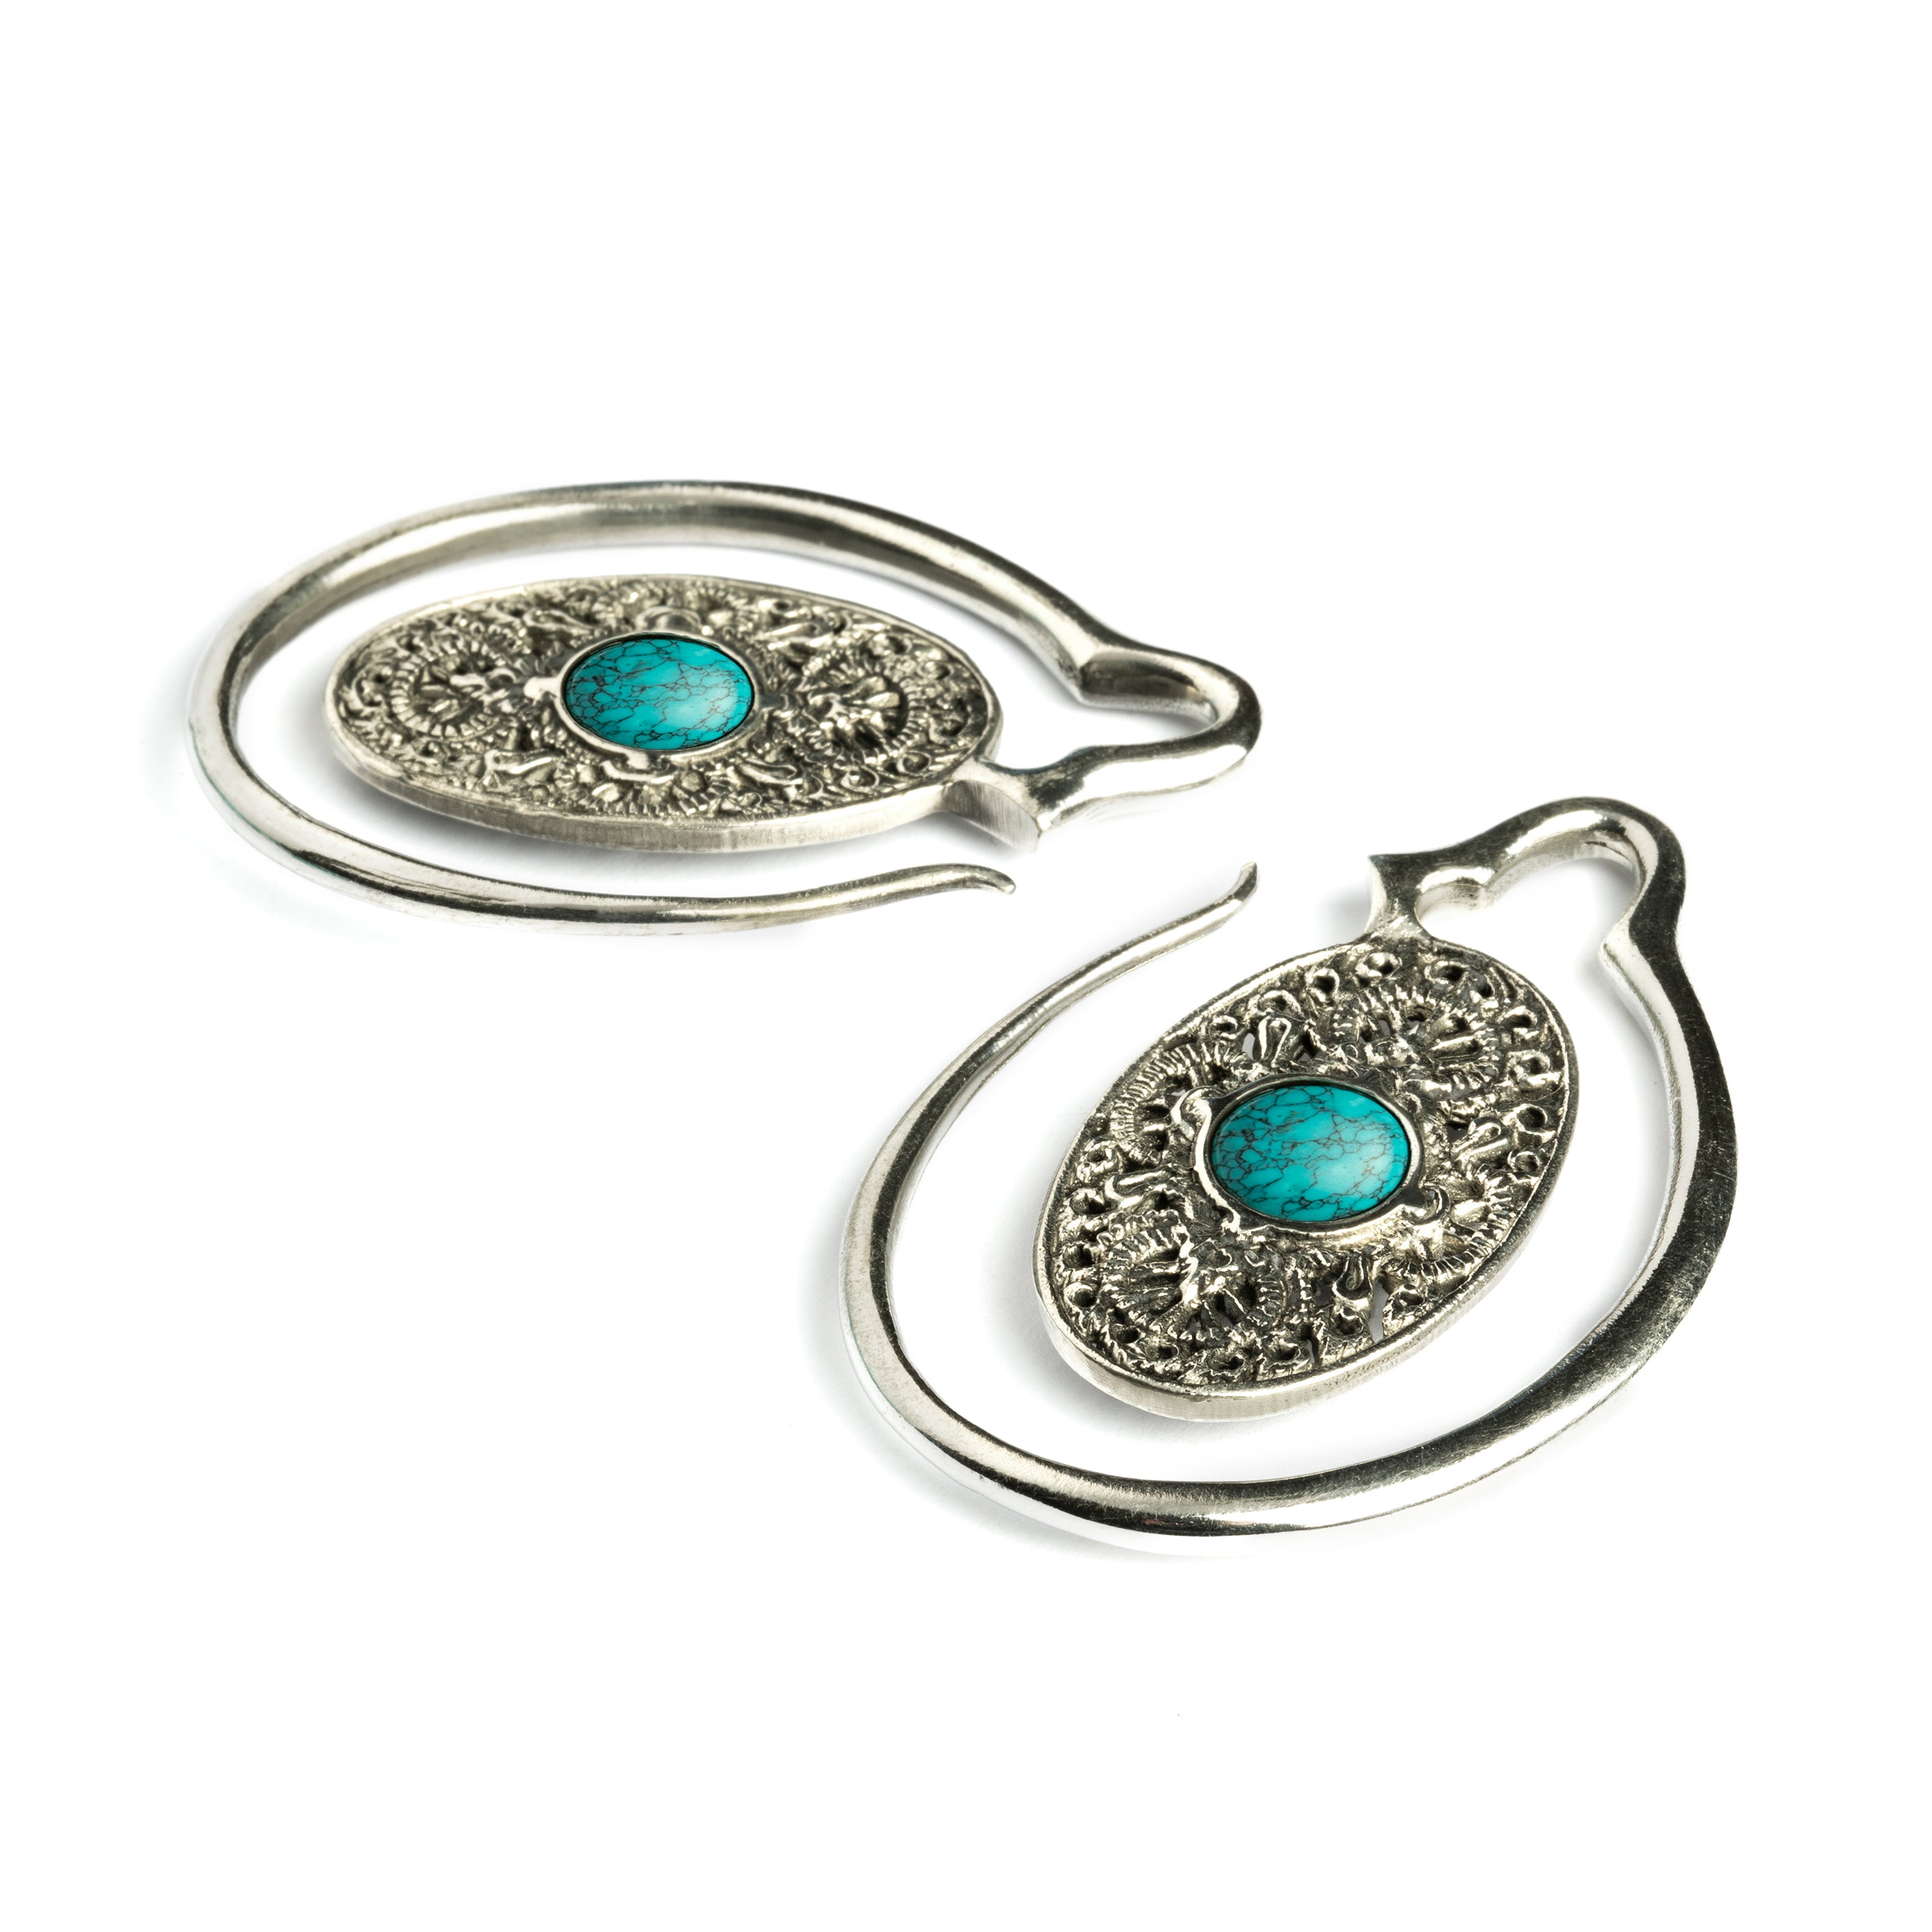 large ear weights hangers, silver colour oval shaped with intricate filigree pattern and turquoise down view